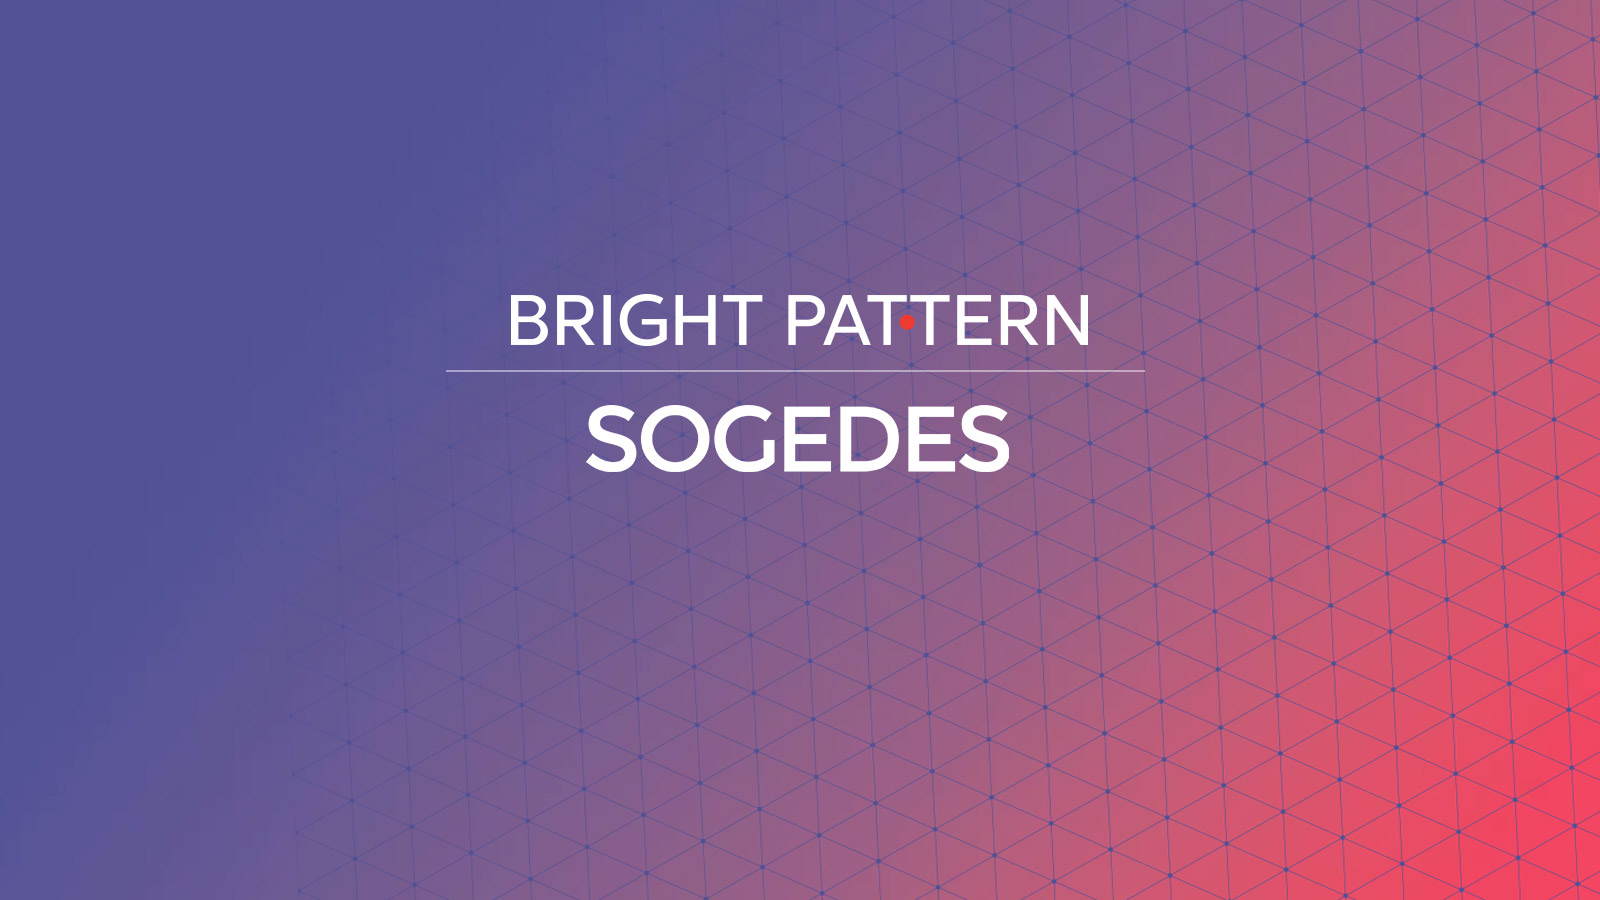 Bright Pattern Partners with German-Based SOGEDES to Deliver True Omnichannel CX Solutions to European Customers